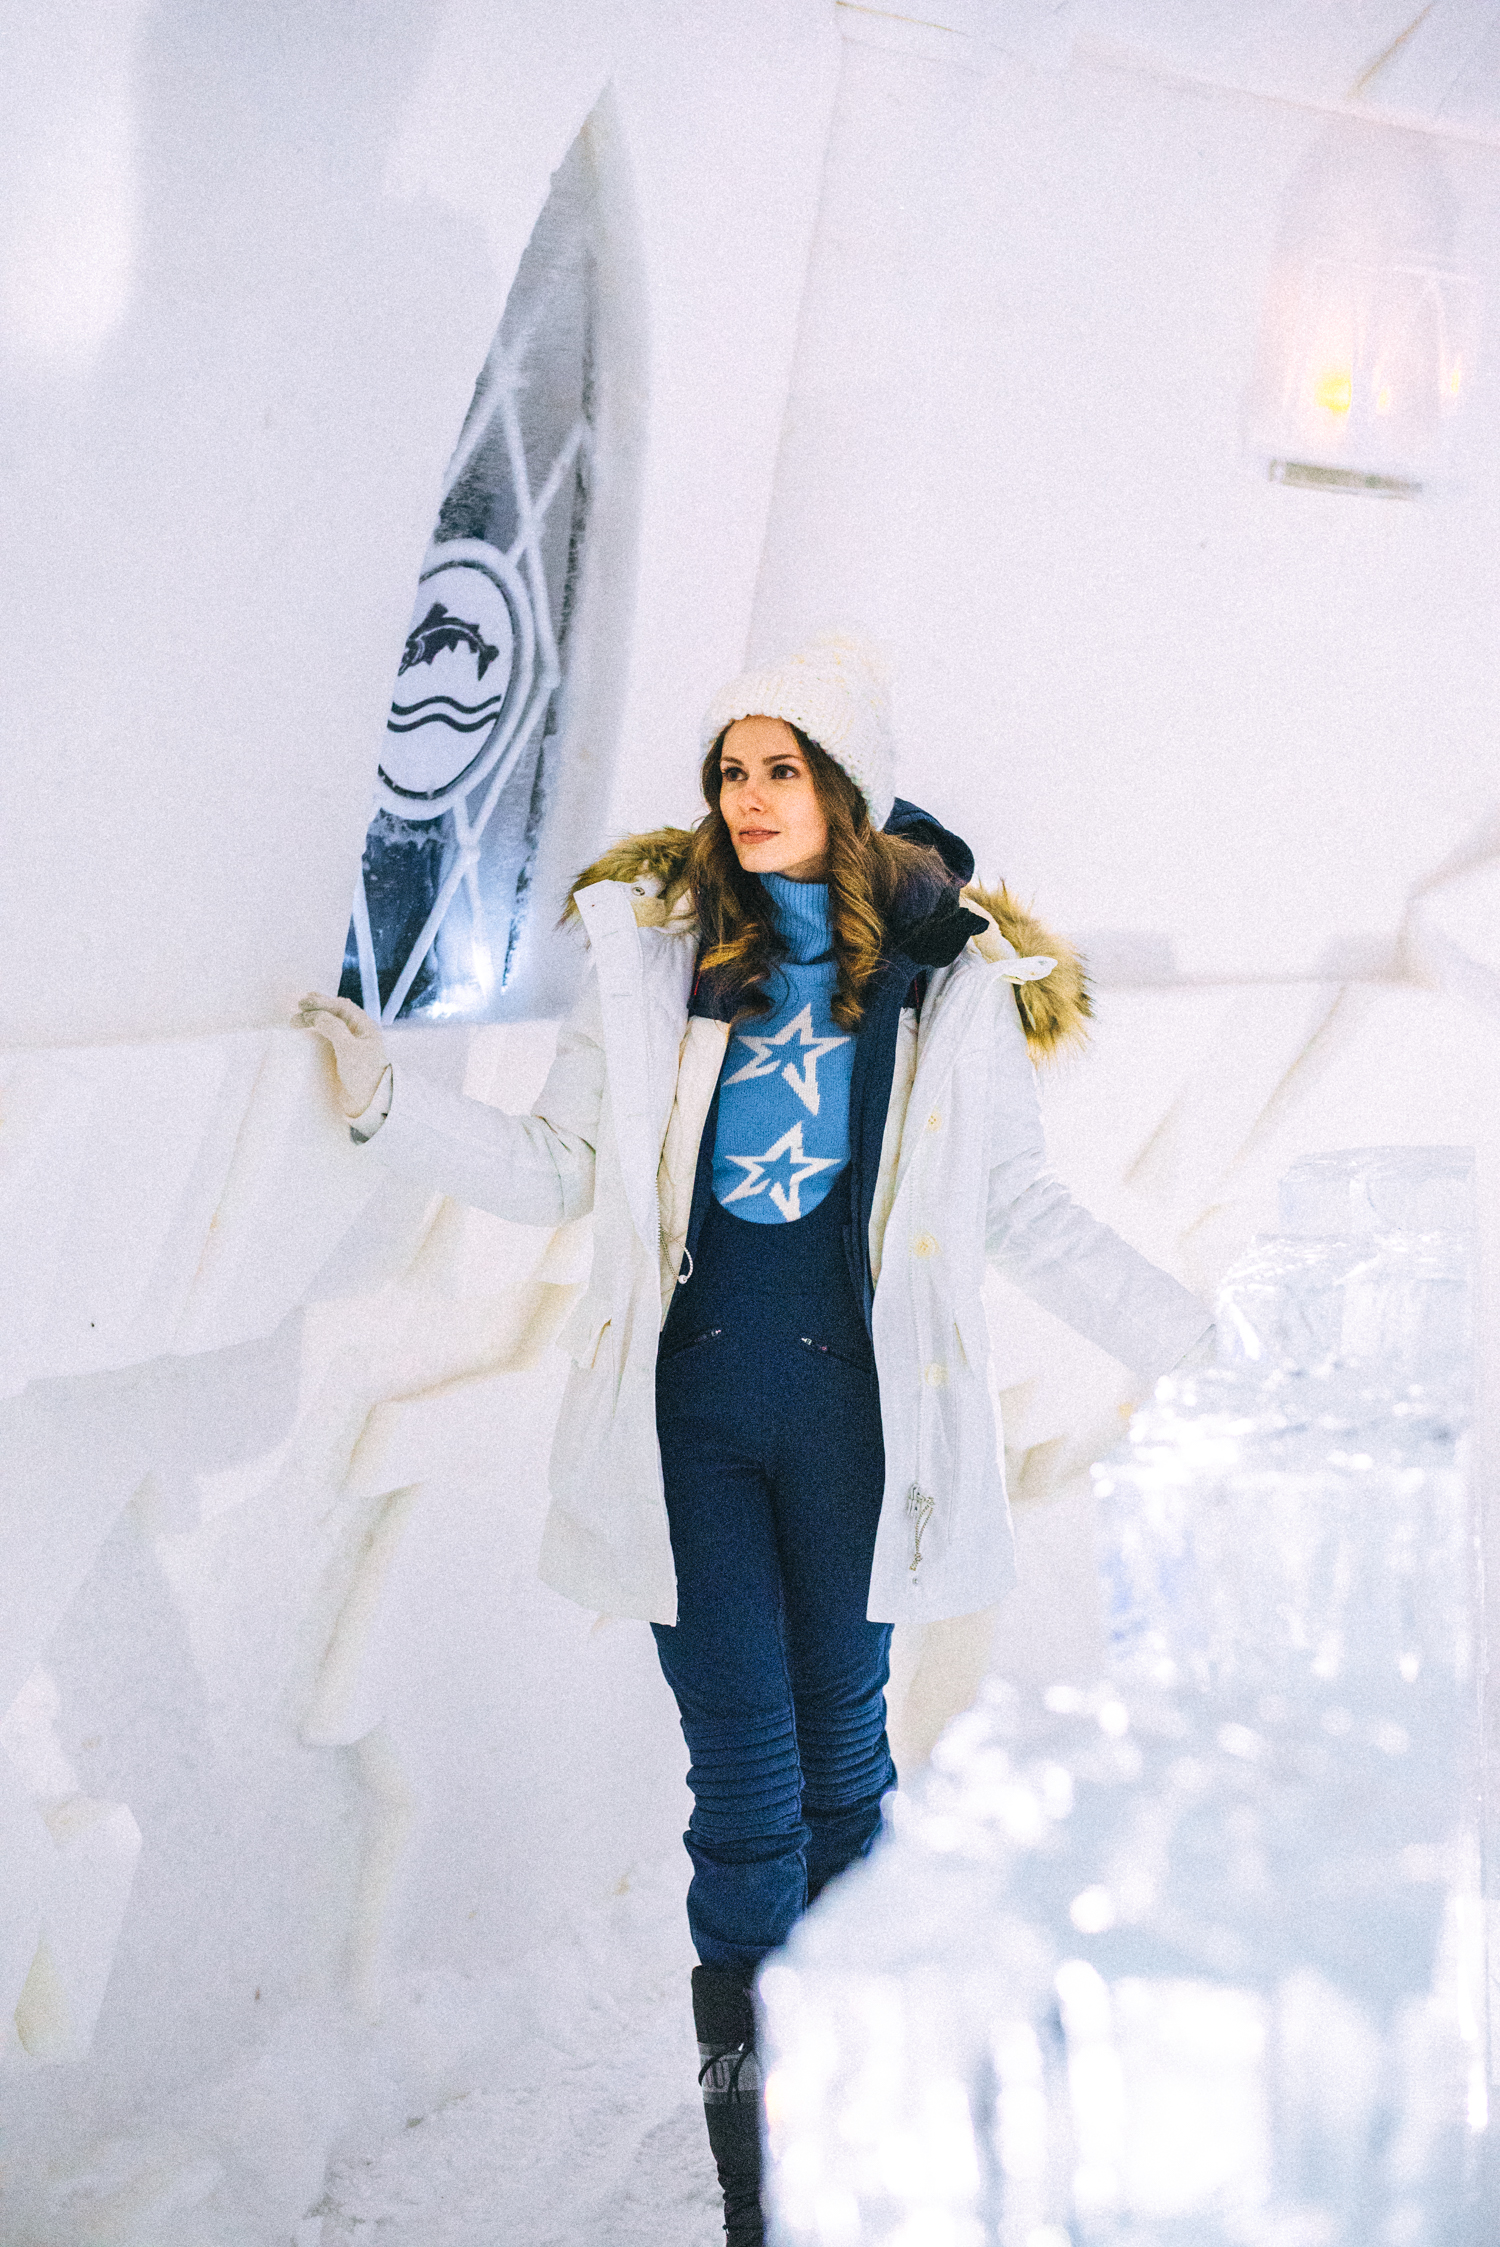 Alyssa Campanella of The A List blog visits the Game of Thrones ice hotel in Finland wearing Perfect Moment ski wear